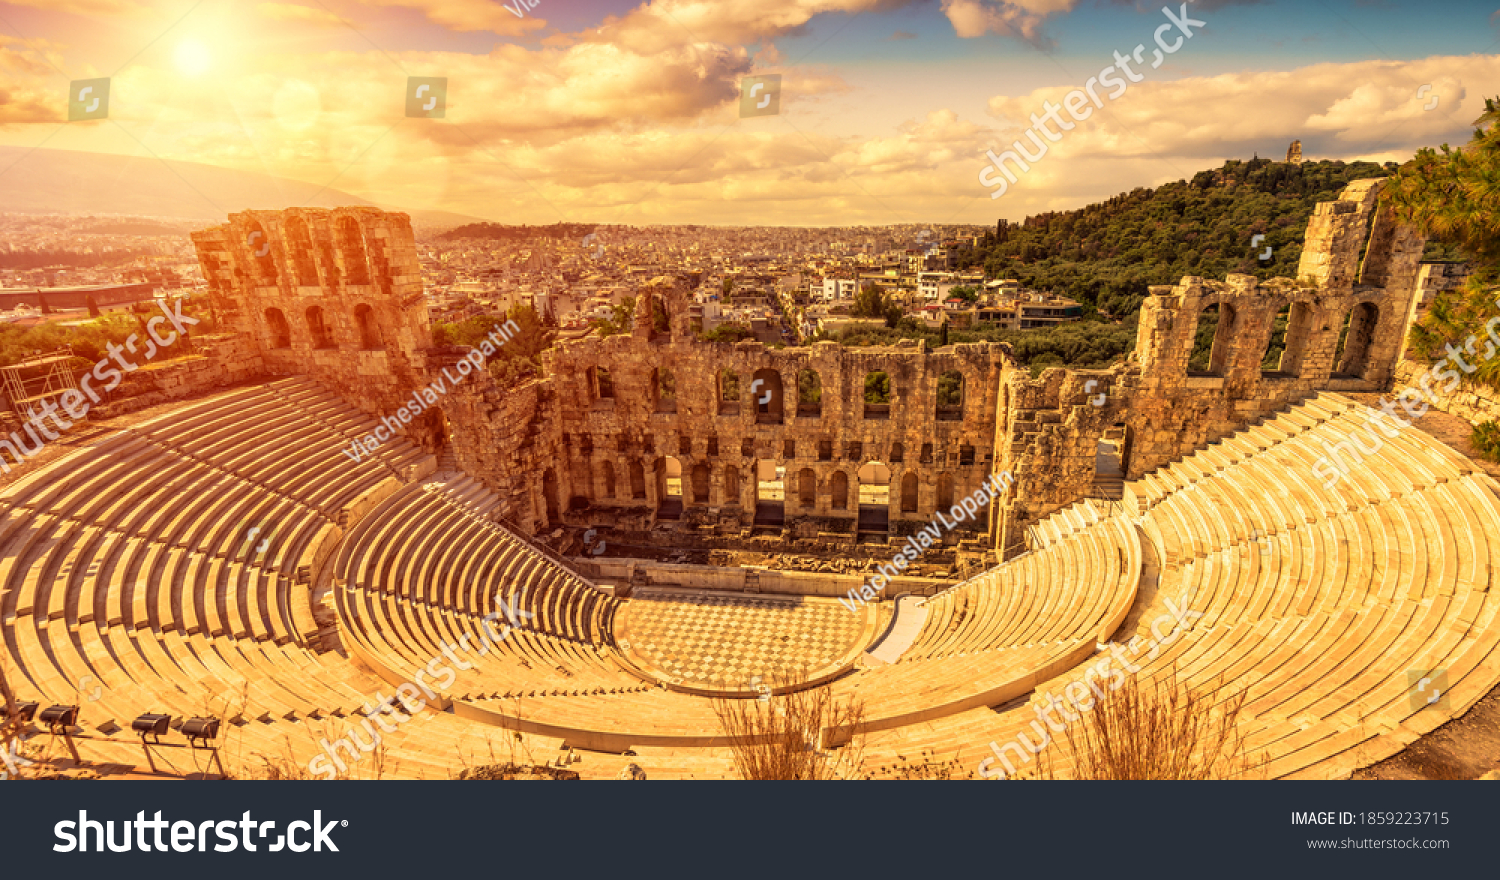 Odeon of Herodes Atticus at sunset, Athens, Greece. It is old famous landmark of Athens. Scenic panorama of ancient Greek monument overlooking Athens city. Sunny panoramic view of classical theater. #1859223715